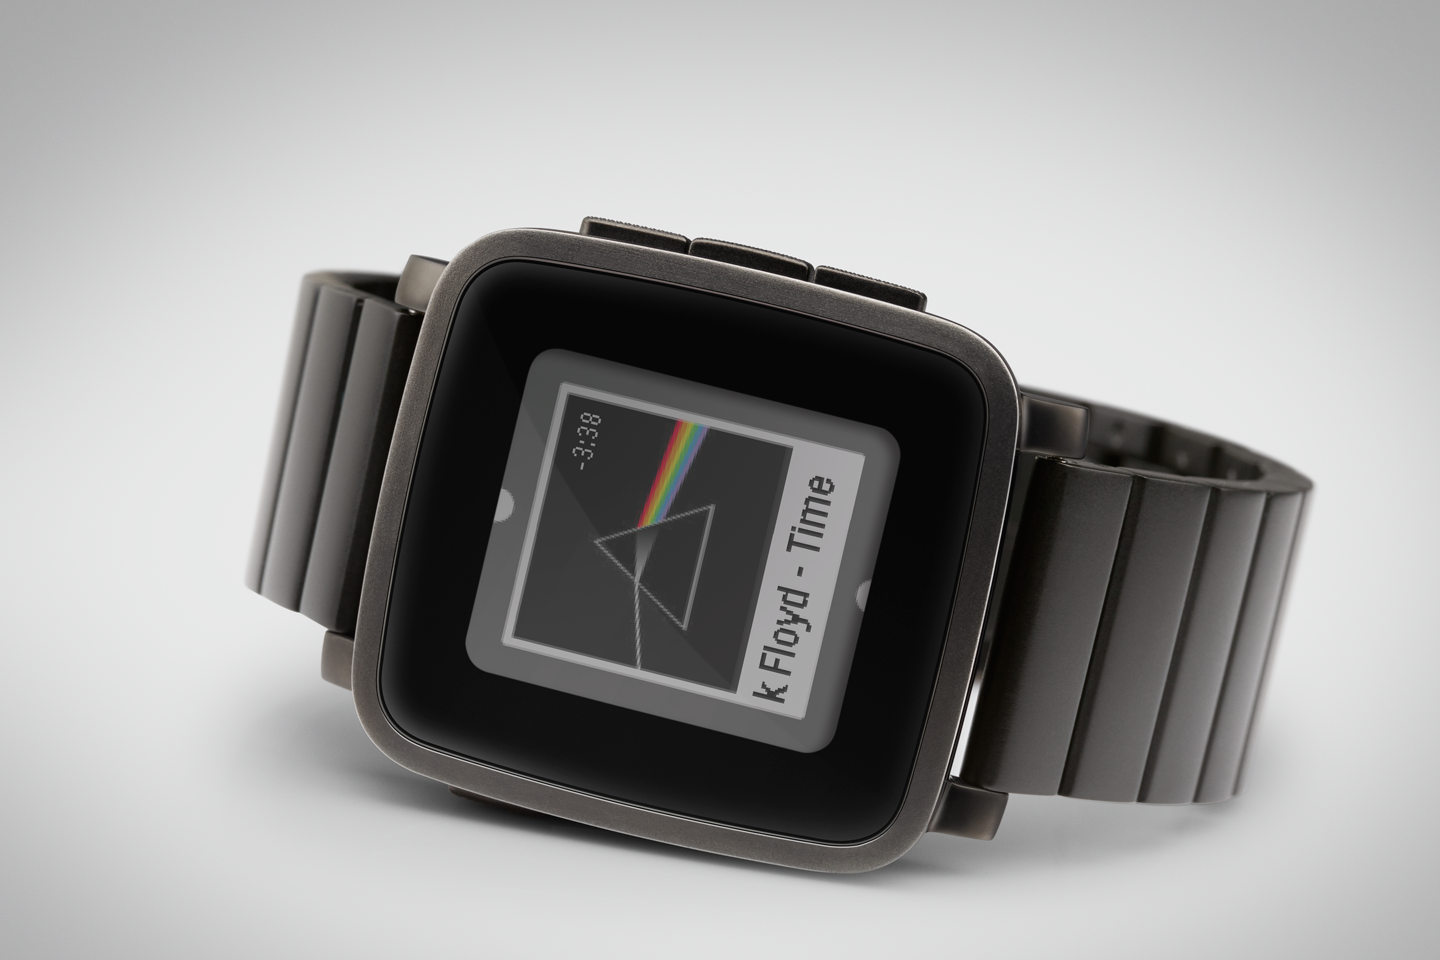 apple watch vs pebble time steel which one should you choose image 8